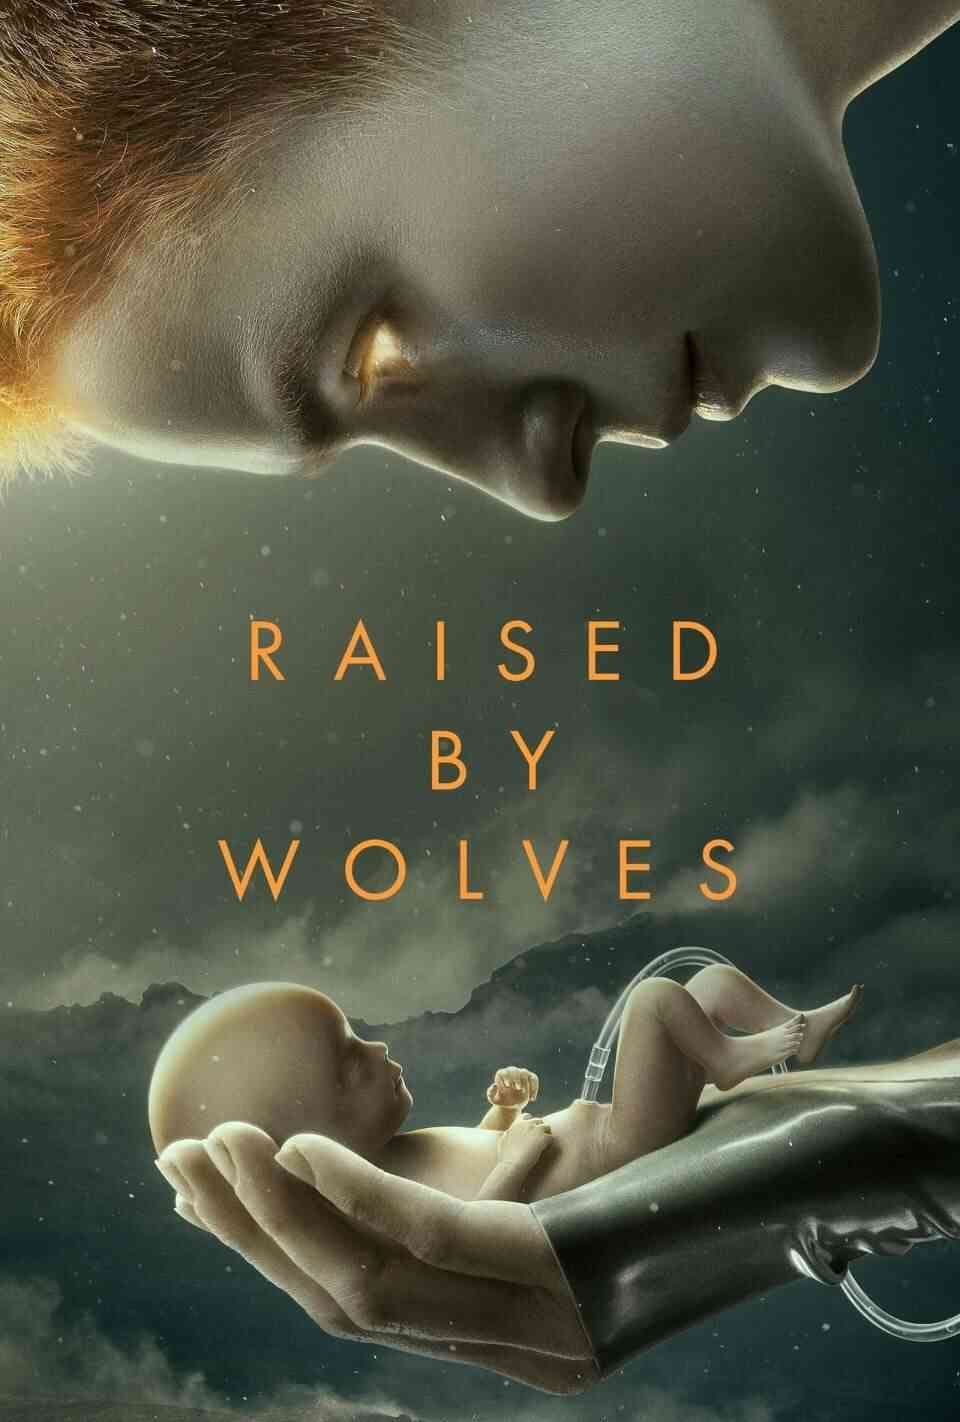 Read Raised by Wolves screenplay (poster)